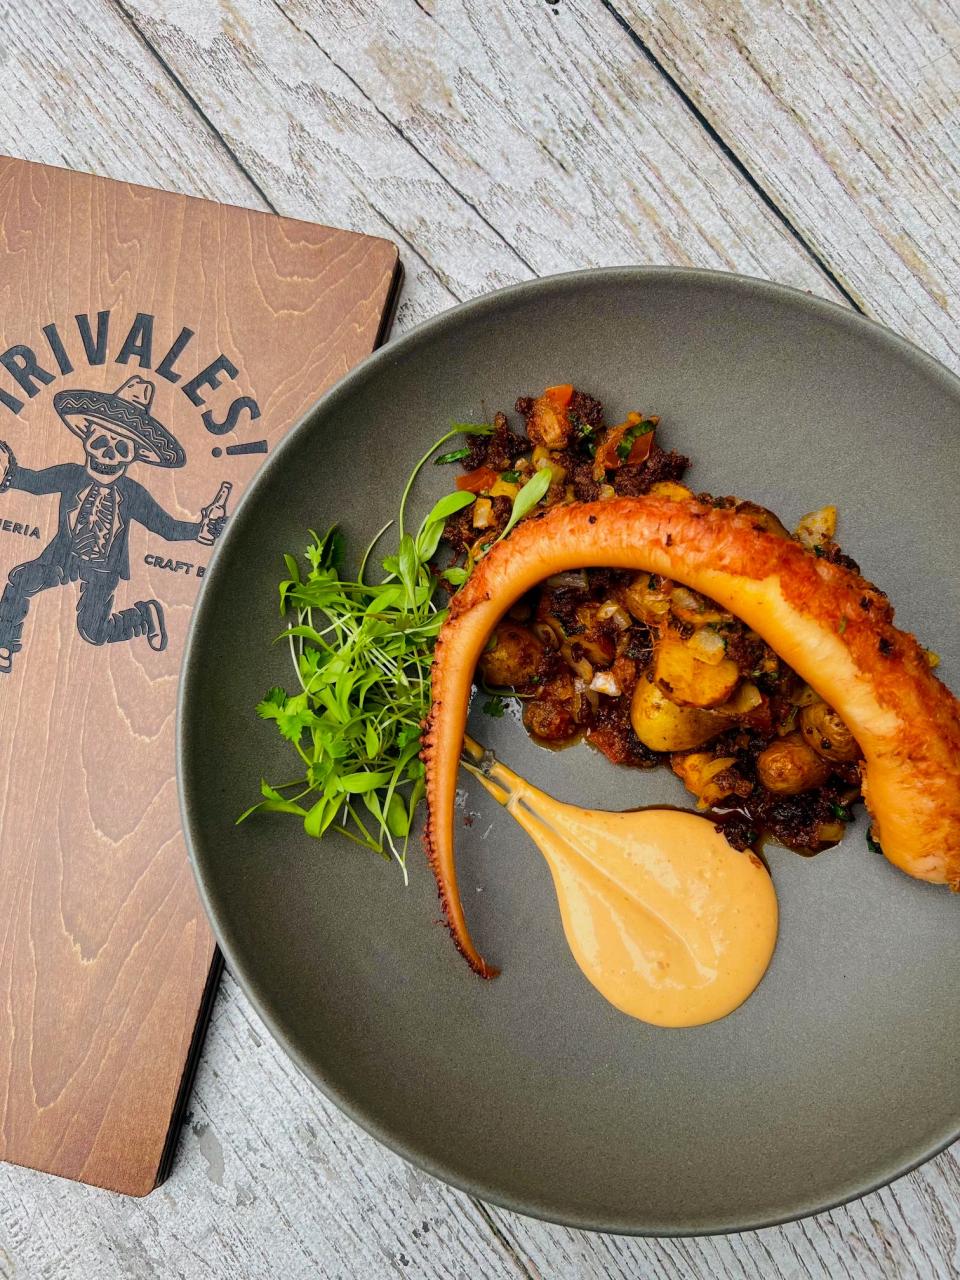 On the menu at Rivales Taquería in West Palm Beach: tender Octopus served with chorizo, home-fried potatoes and a chipotle sauce.